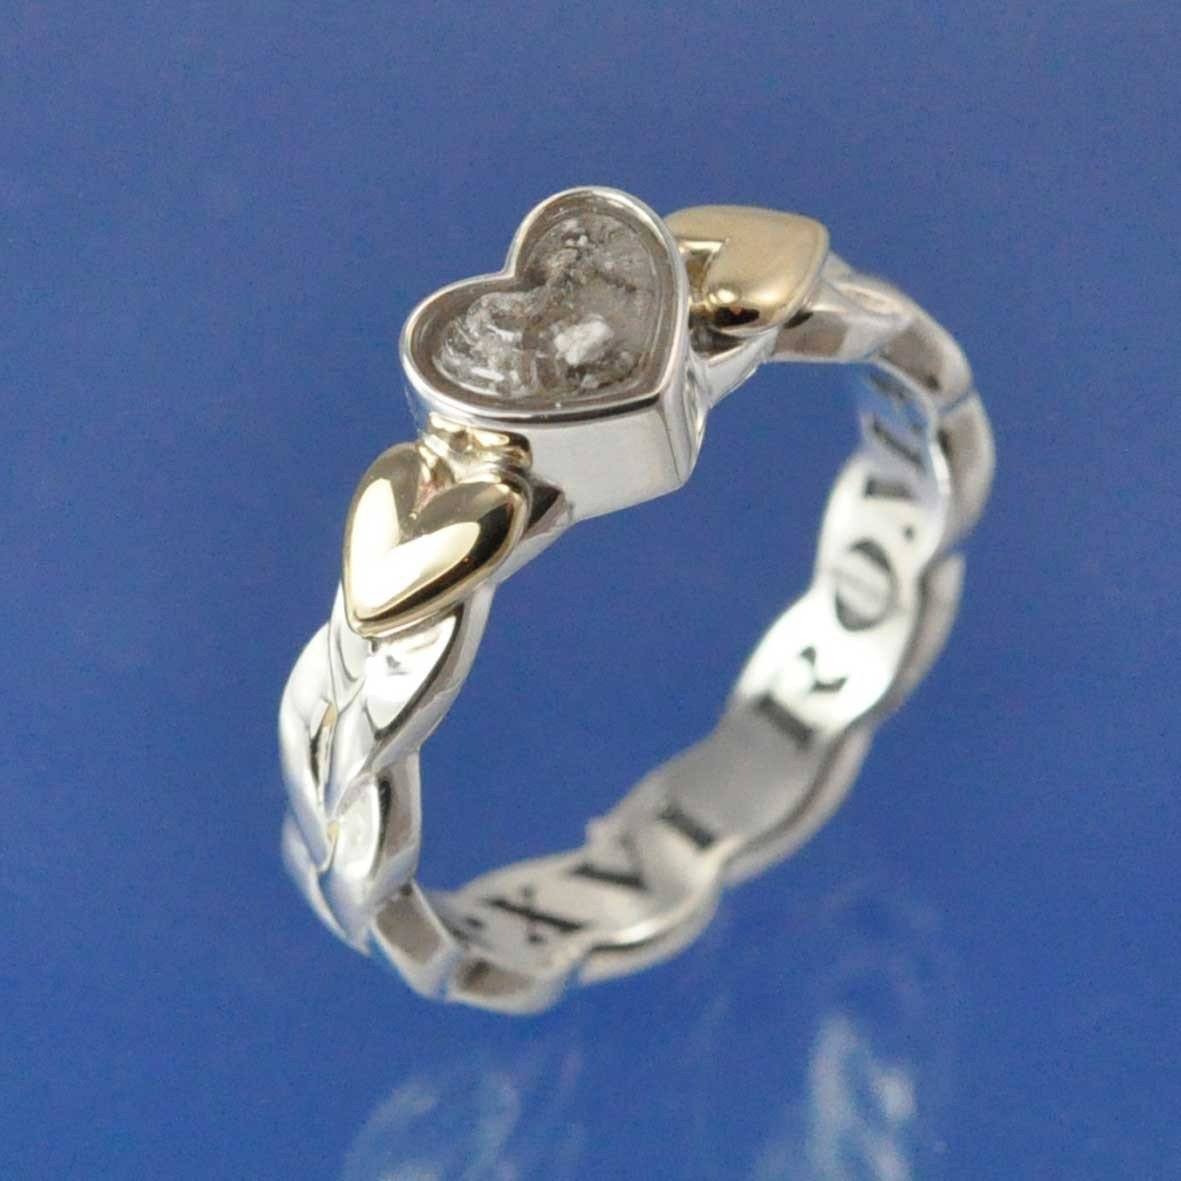 Cremation Ash Ring With Plaited Ring Shank. Ring by Chris Parry Jewellery